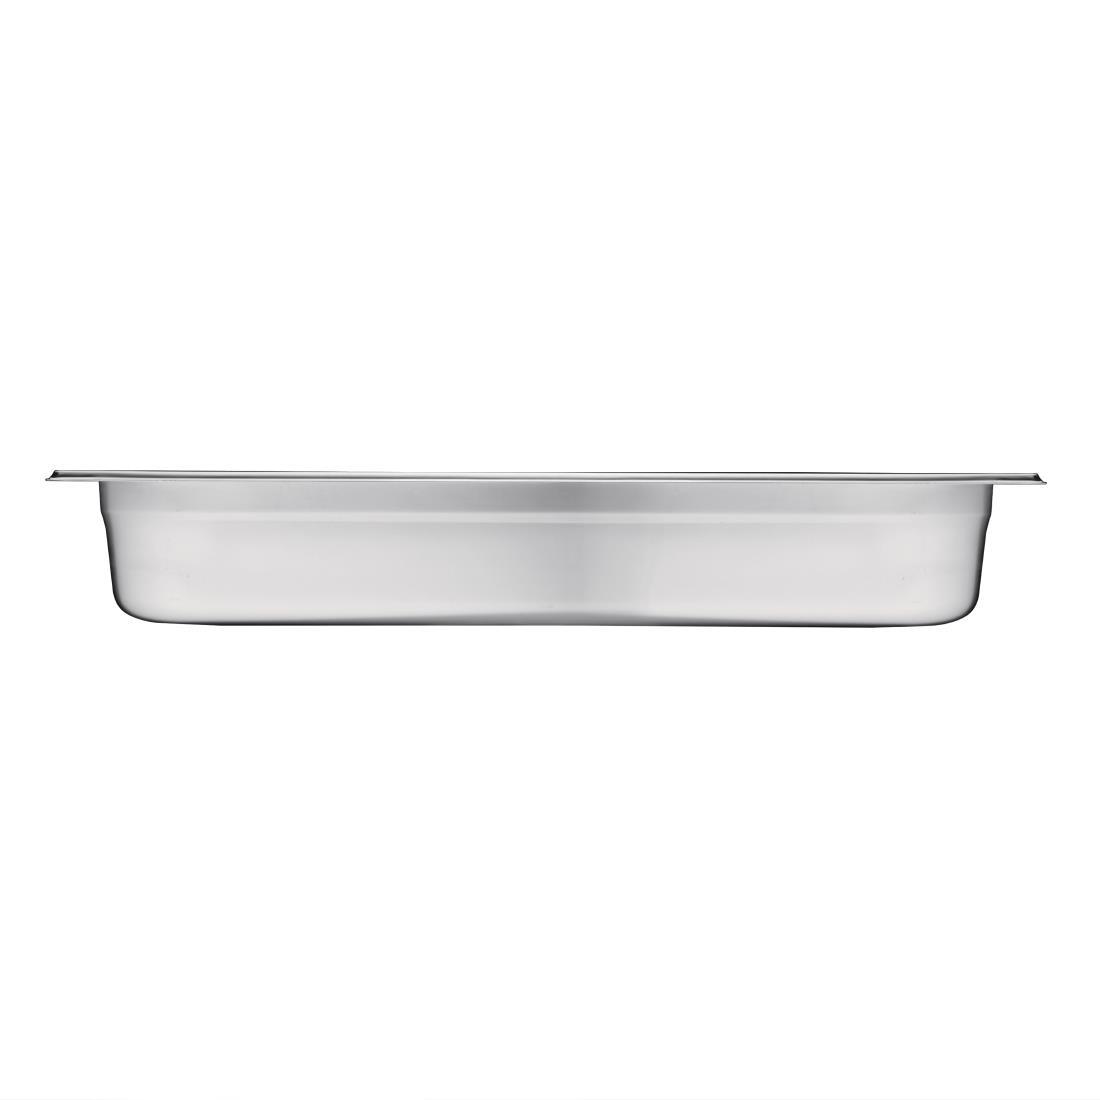 Vogue Stainless Steel 2/1 Gastronorm Pan 100mm - K804  - 3